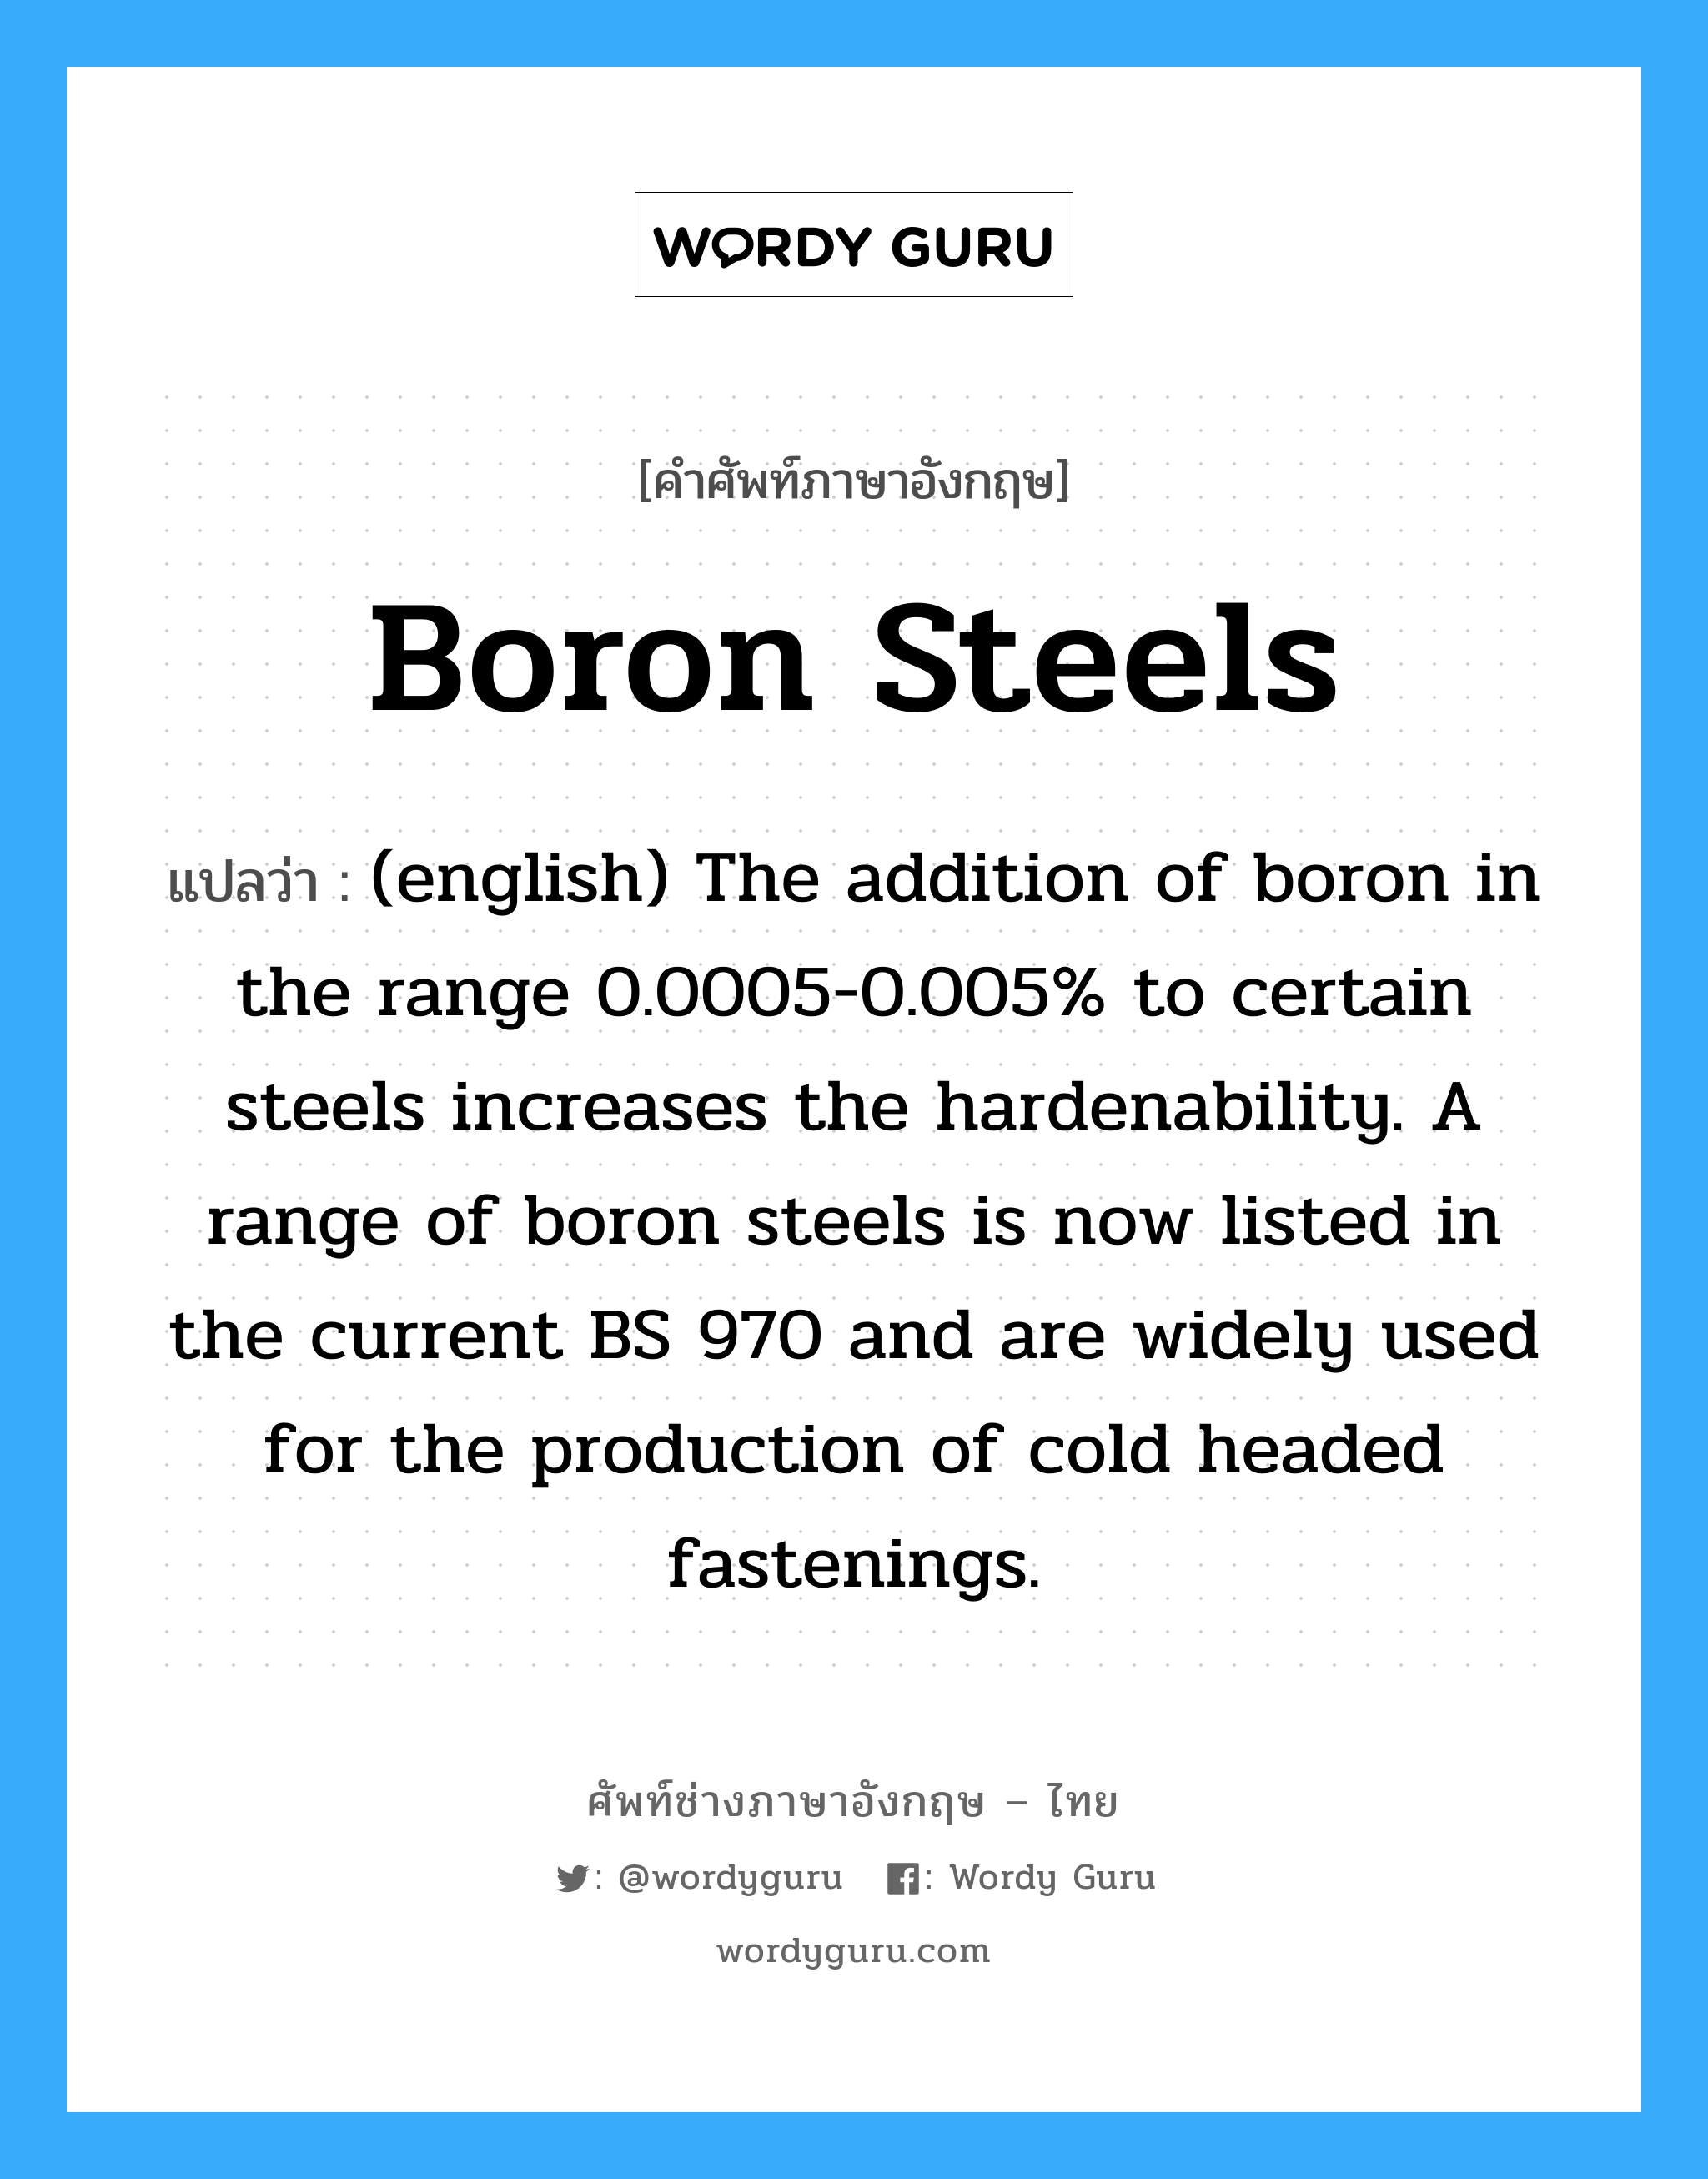 (english) The addition of boron in the range 0.0005-0.005% to certain steels increases the hardenability. A range of boron steels is now listed in the current BS 970 and are widely used for the production of cold headed fastenings. ภาษาอังกฤษ?, คำศัพท์ช่างภาษาอังกฤษ - ไทย (english) The addition of boron in the range 0.0005-0.005% to certain steels increases the hardenability. A range of boron steels is now listed in the current BS 970 and are widely used for the production of cold headed fastenings. คำศัพท์ภาษาอังกฤษ (english) The addition of boron in the range 0.0005-0.005% to certain steels increases the hardenability. A range of boron steels is now listed in the current BS 970 and are widely used for the production of cold headed fastenings. แปลว่า Boron Steels